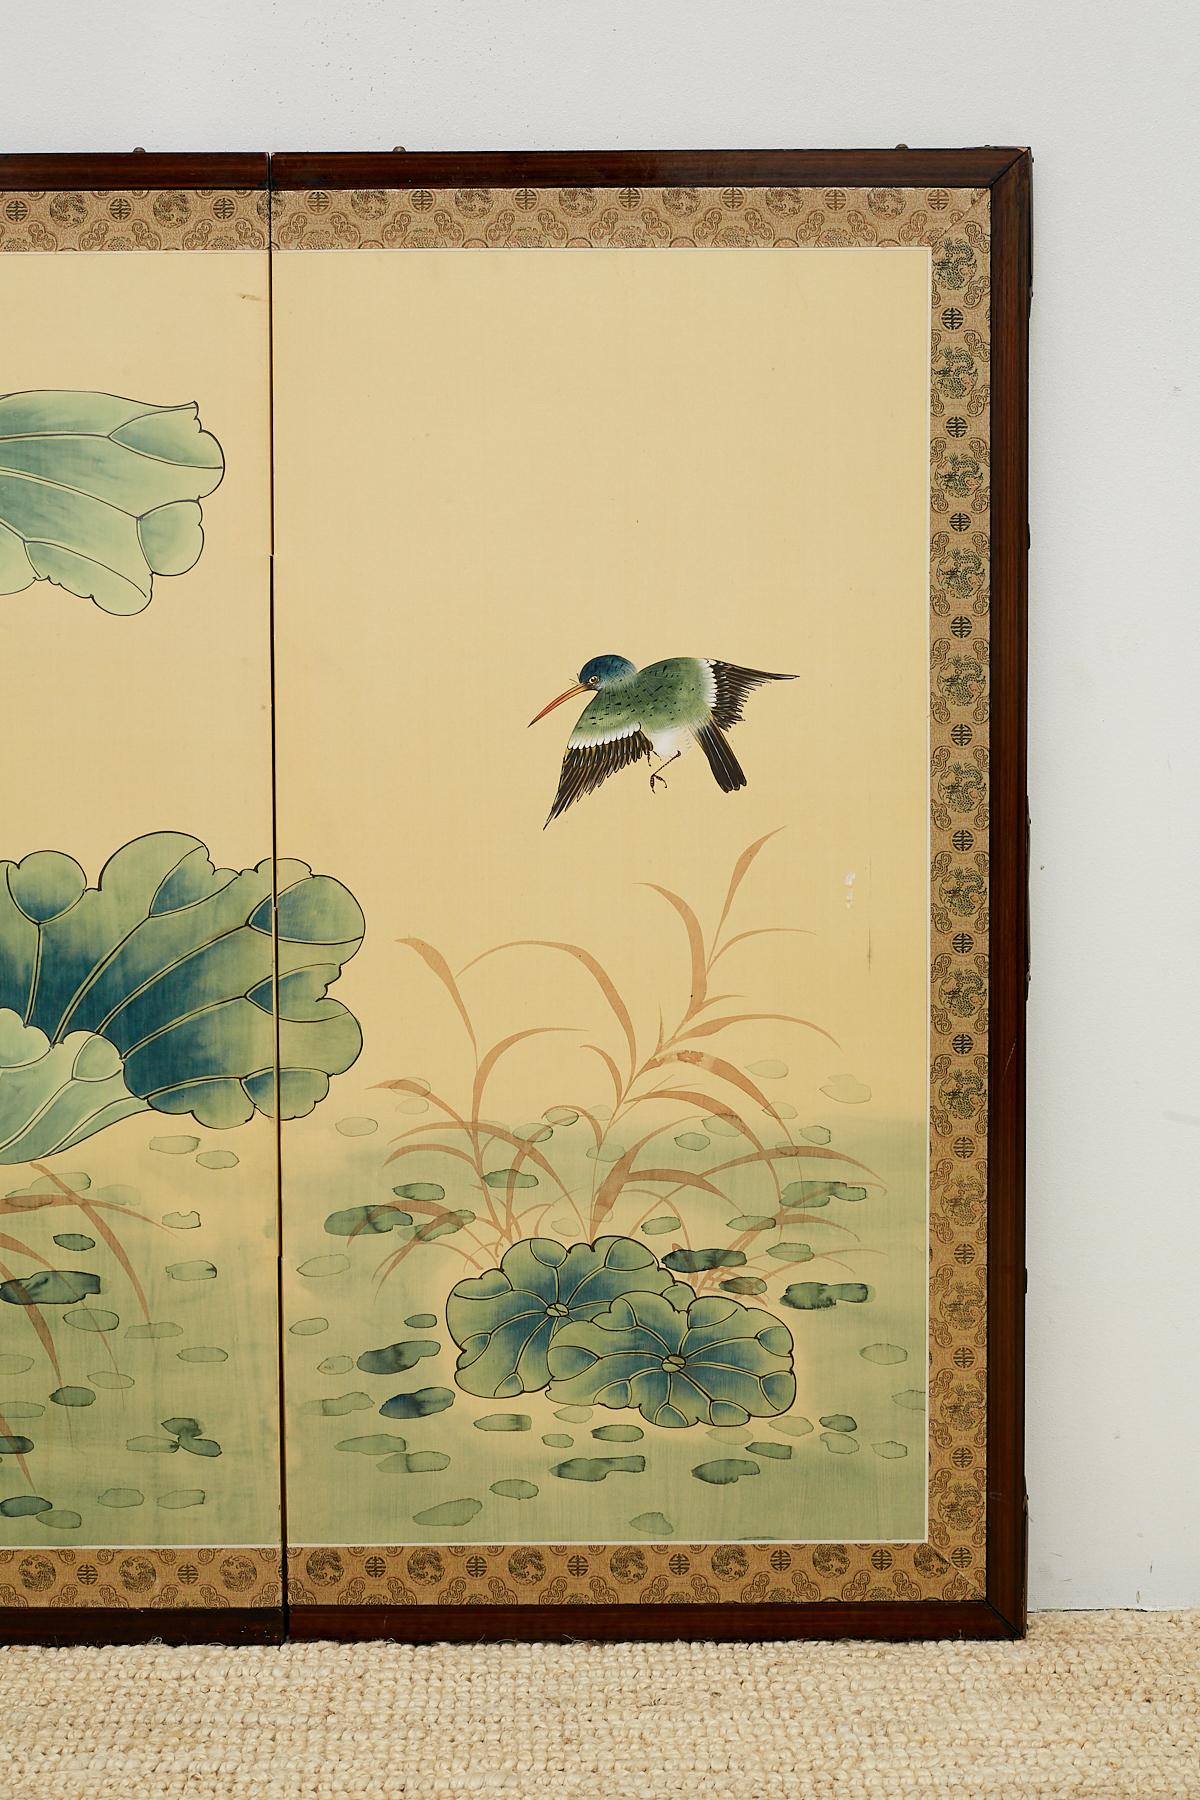 Delightful Asian four panel Byobu screen depicting a water scene of flora and fauna. Large green lily pads dominate the foreground with delicate flowers and small birds. Painted with soft feminine colors and set in a contrasting dark wood frame with